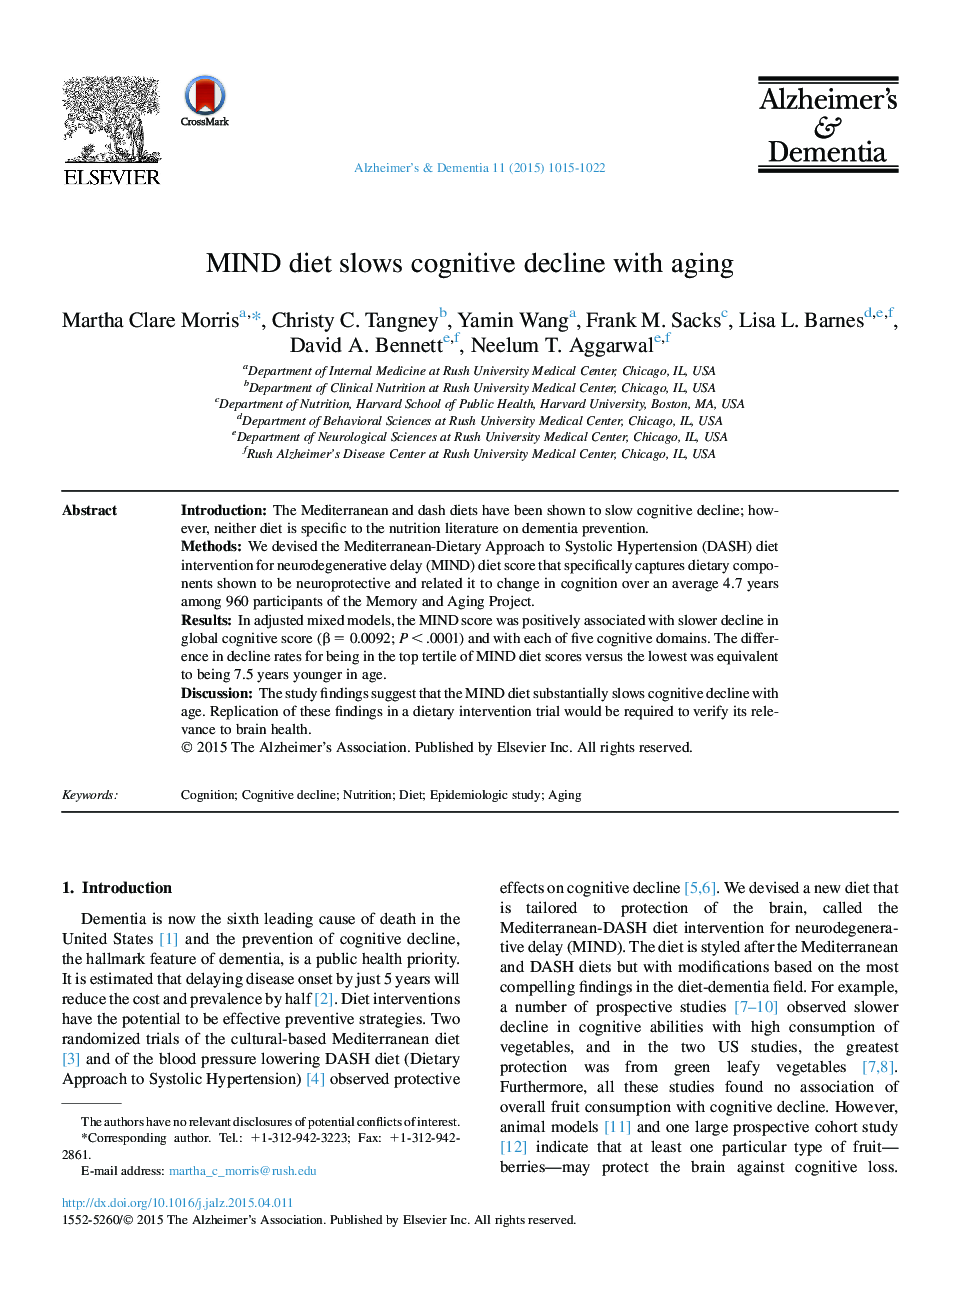 Featured ArticleMIND diet slows cognitive decline with aging